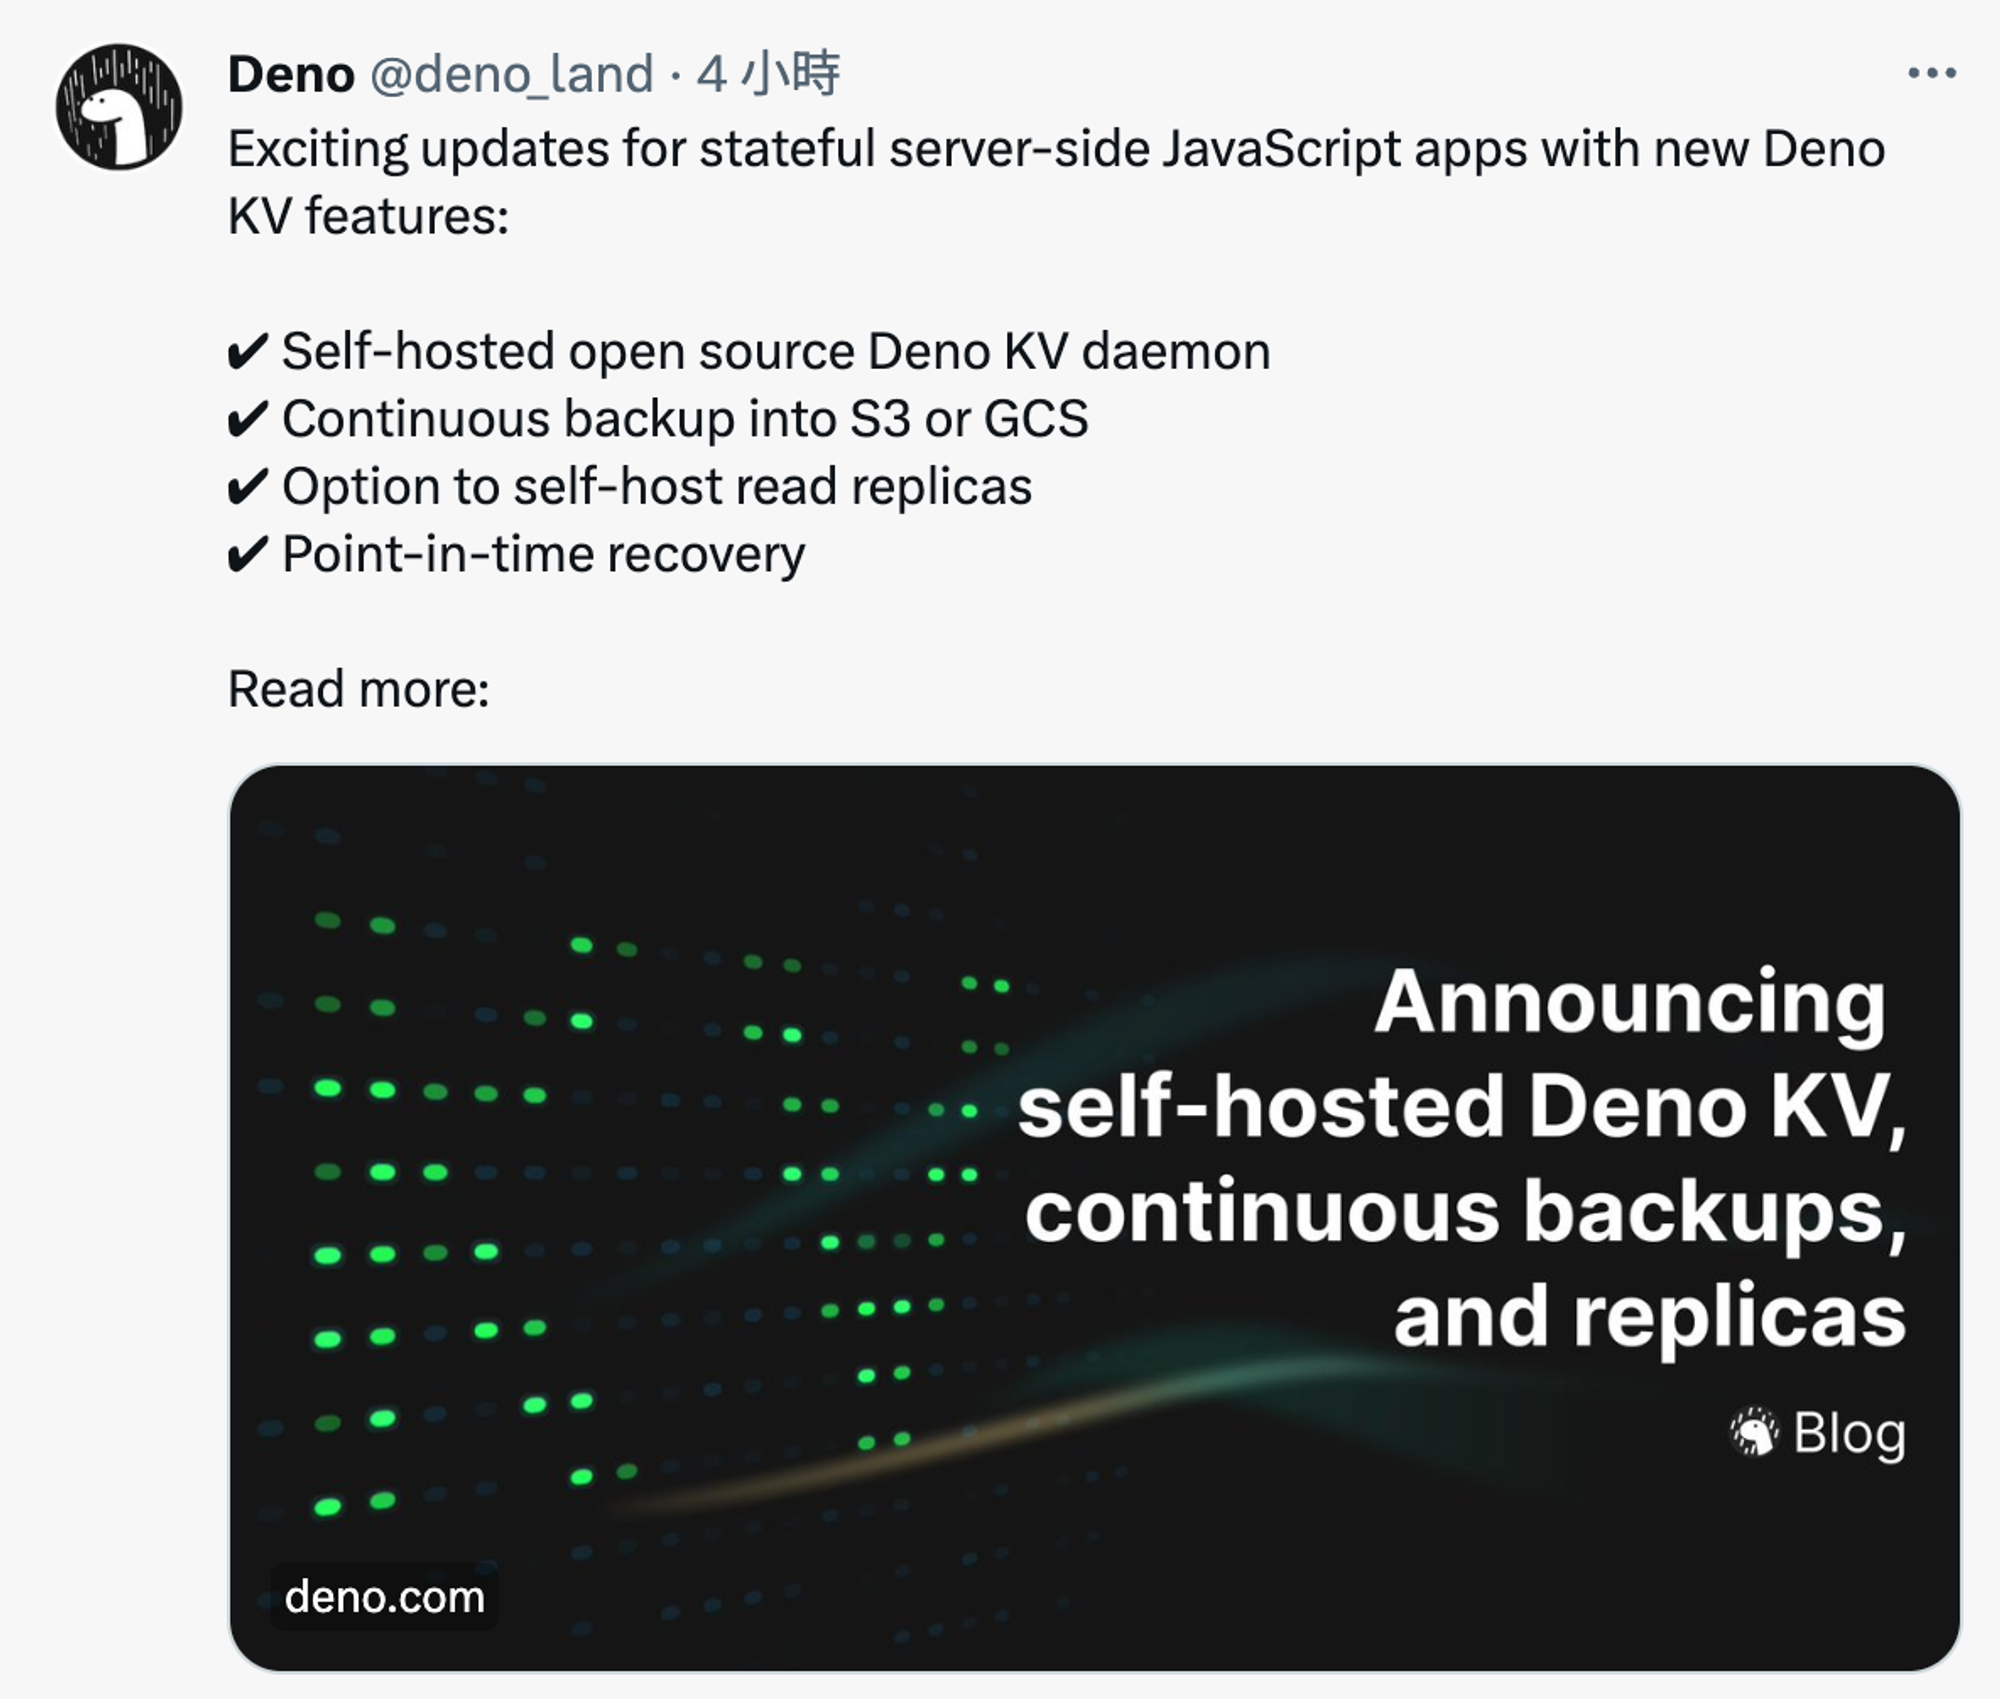 src: https://deno.com/blog/kv-is-open-source-with-continuous-backup